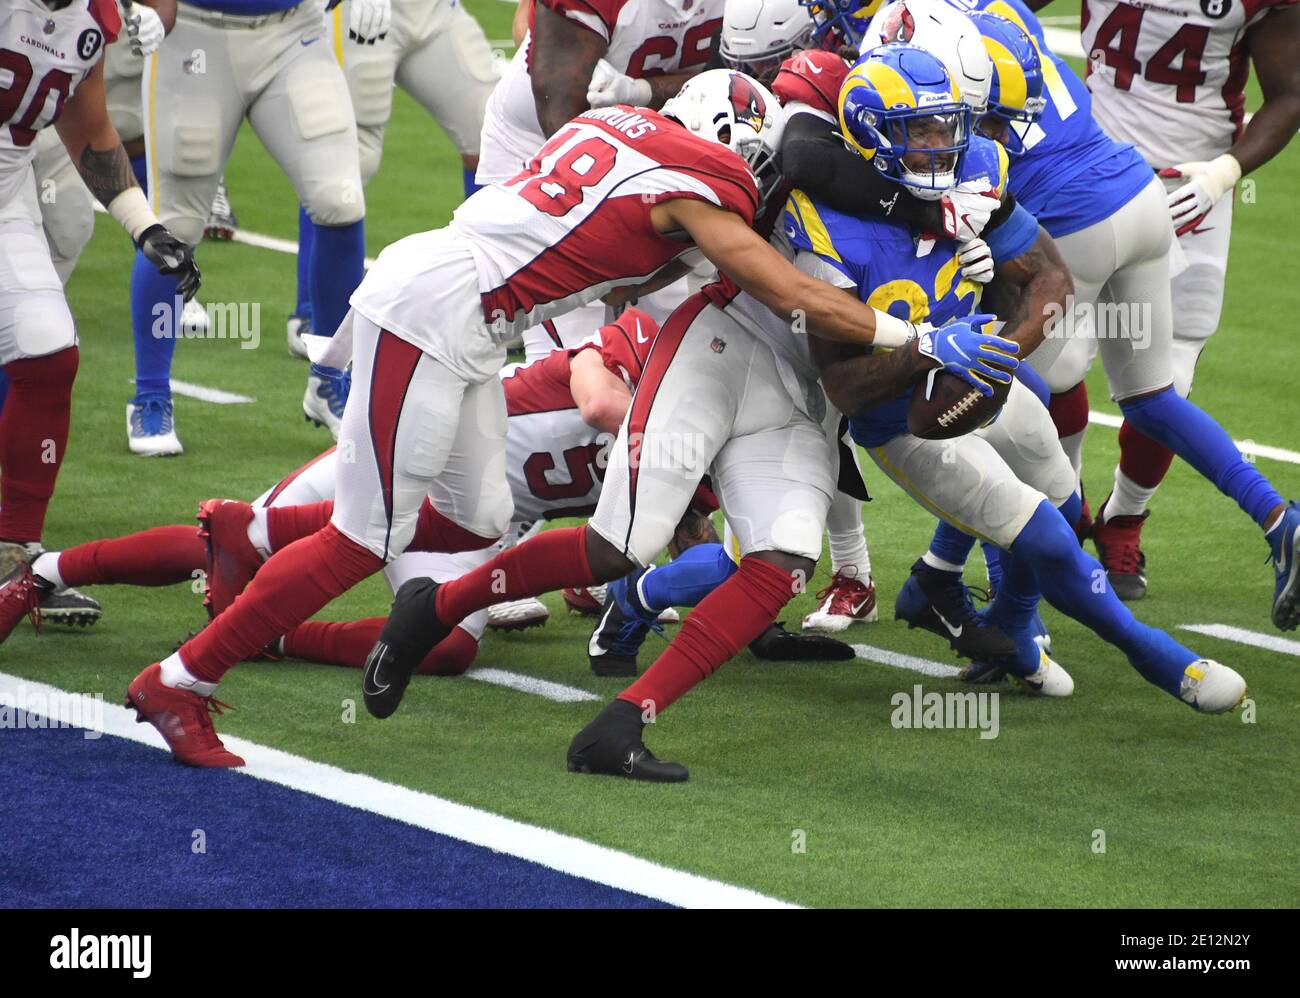 Inglewood, United States. 03rd Jan, 2021. Los Angeles Rams running back Cam Akers (23) is stripped of the ball by Arizona Cardinals Isaiah Simmons (48) at SoFi Stadium in Inglewood, California on Sunday, January 3, 2021. The Rams defeated the Cardinals 18-7. Photo by Jon SooHoo/UPI Credit: UPI/Alamy Live News Stock Photo